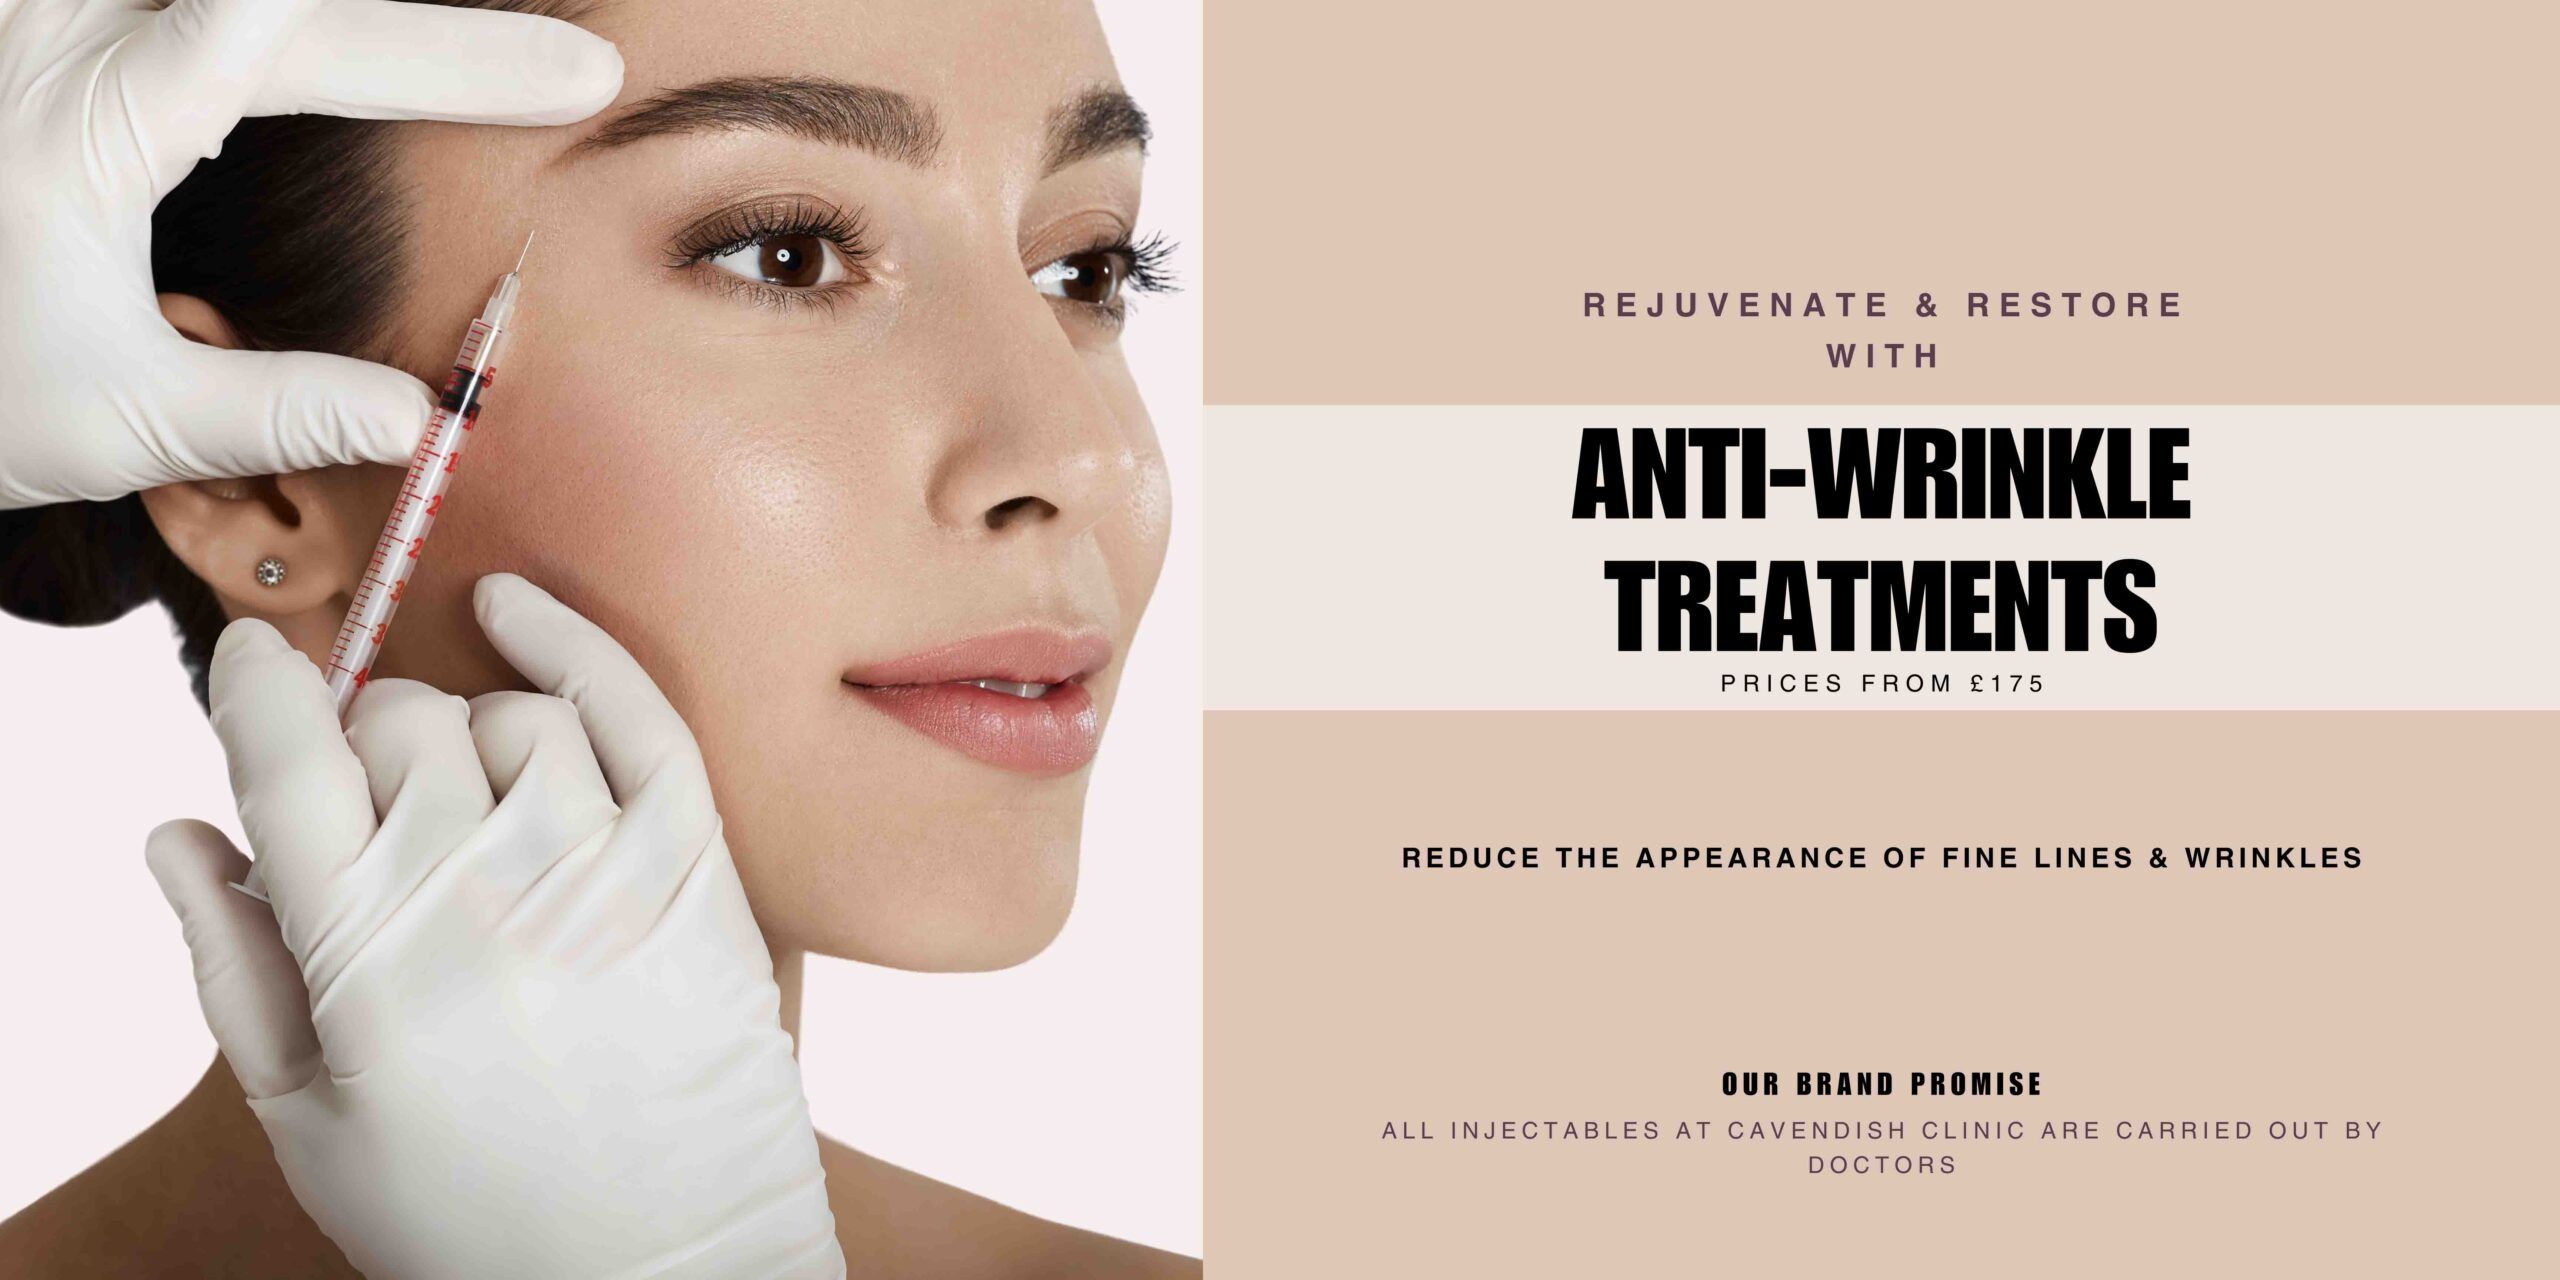 Anti-Wrinkle-Treatments at Cavendish Clinic, by Juvederm